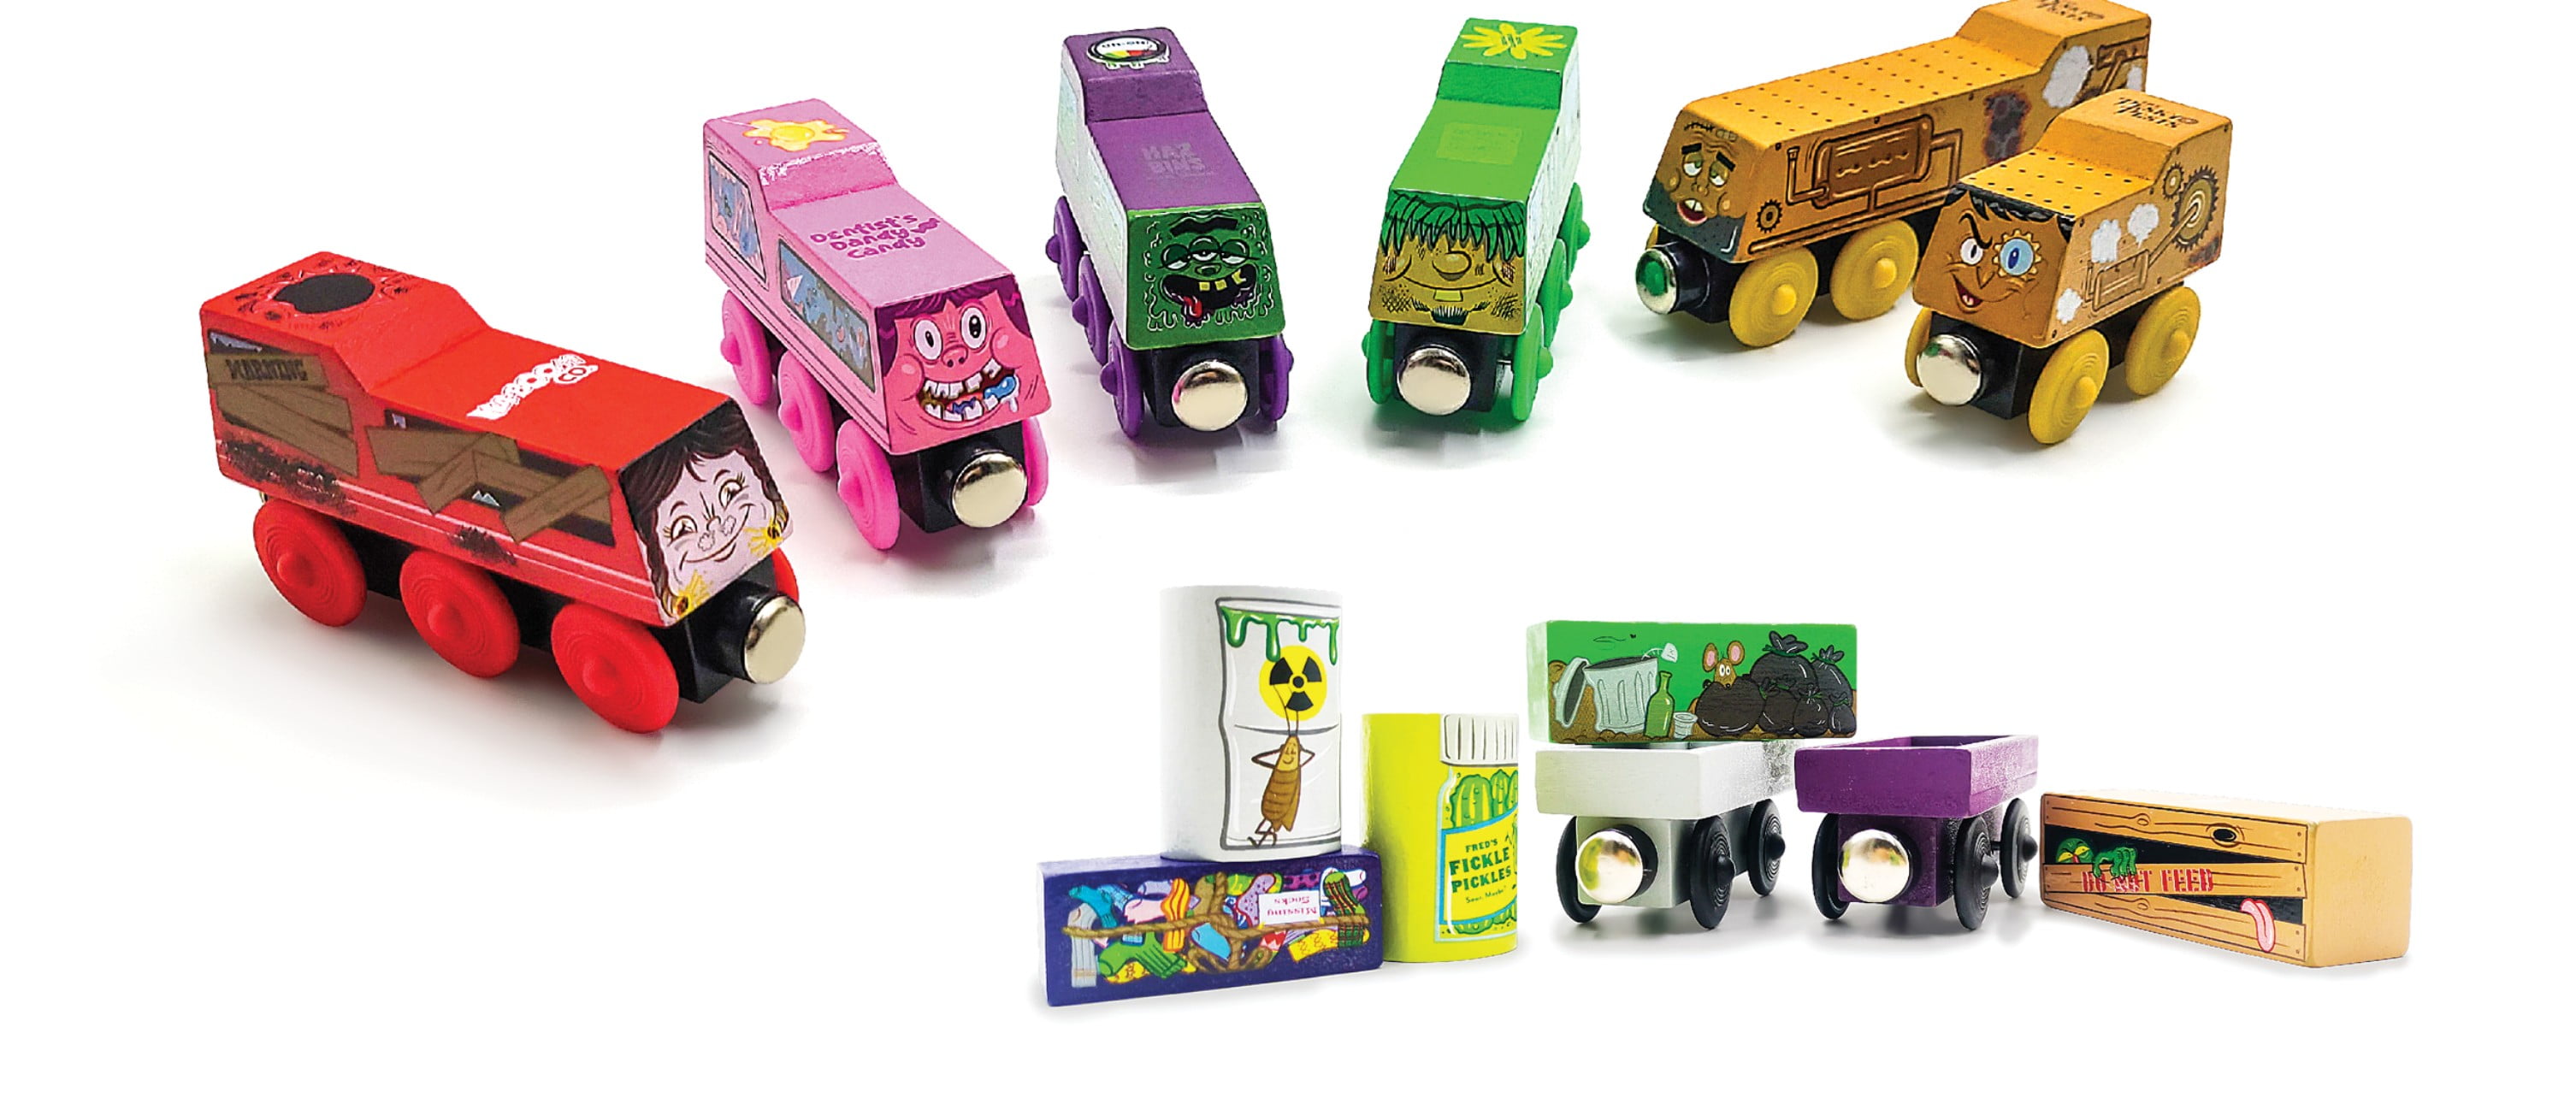 A collection of ZanyTrains™, including T.N.Theresa, a red train with pigtails; Sugar Rush Susie, a purple train with rotting teeth; Trashy Terry, a green train with a moptop; and The Pesky Pests, a twin pair of golden yellow trains